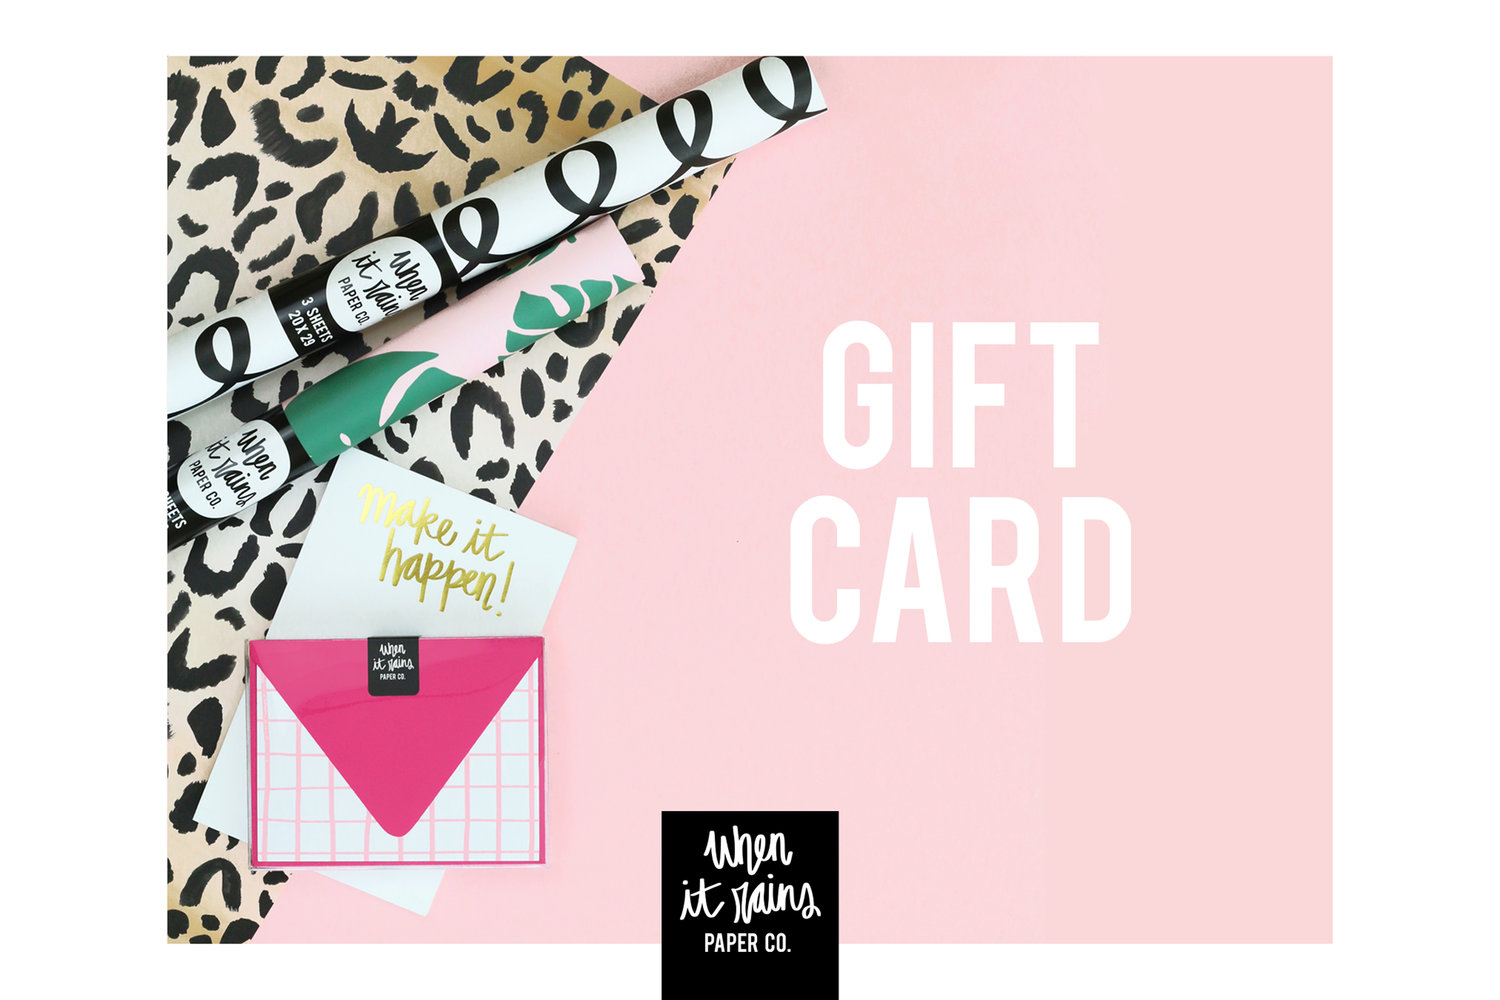 Create Personalized Gift Cards, GiftCards.com